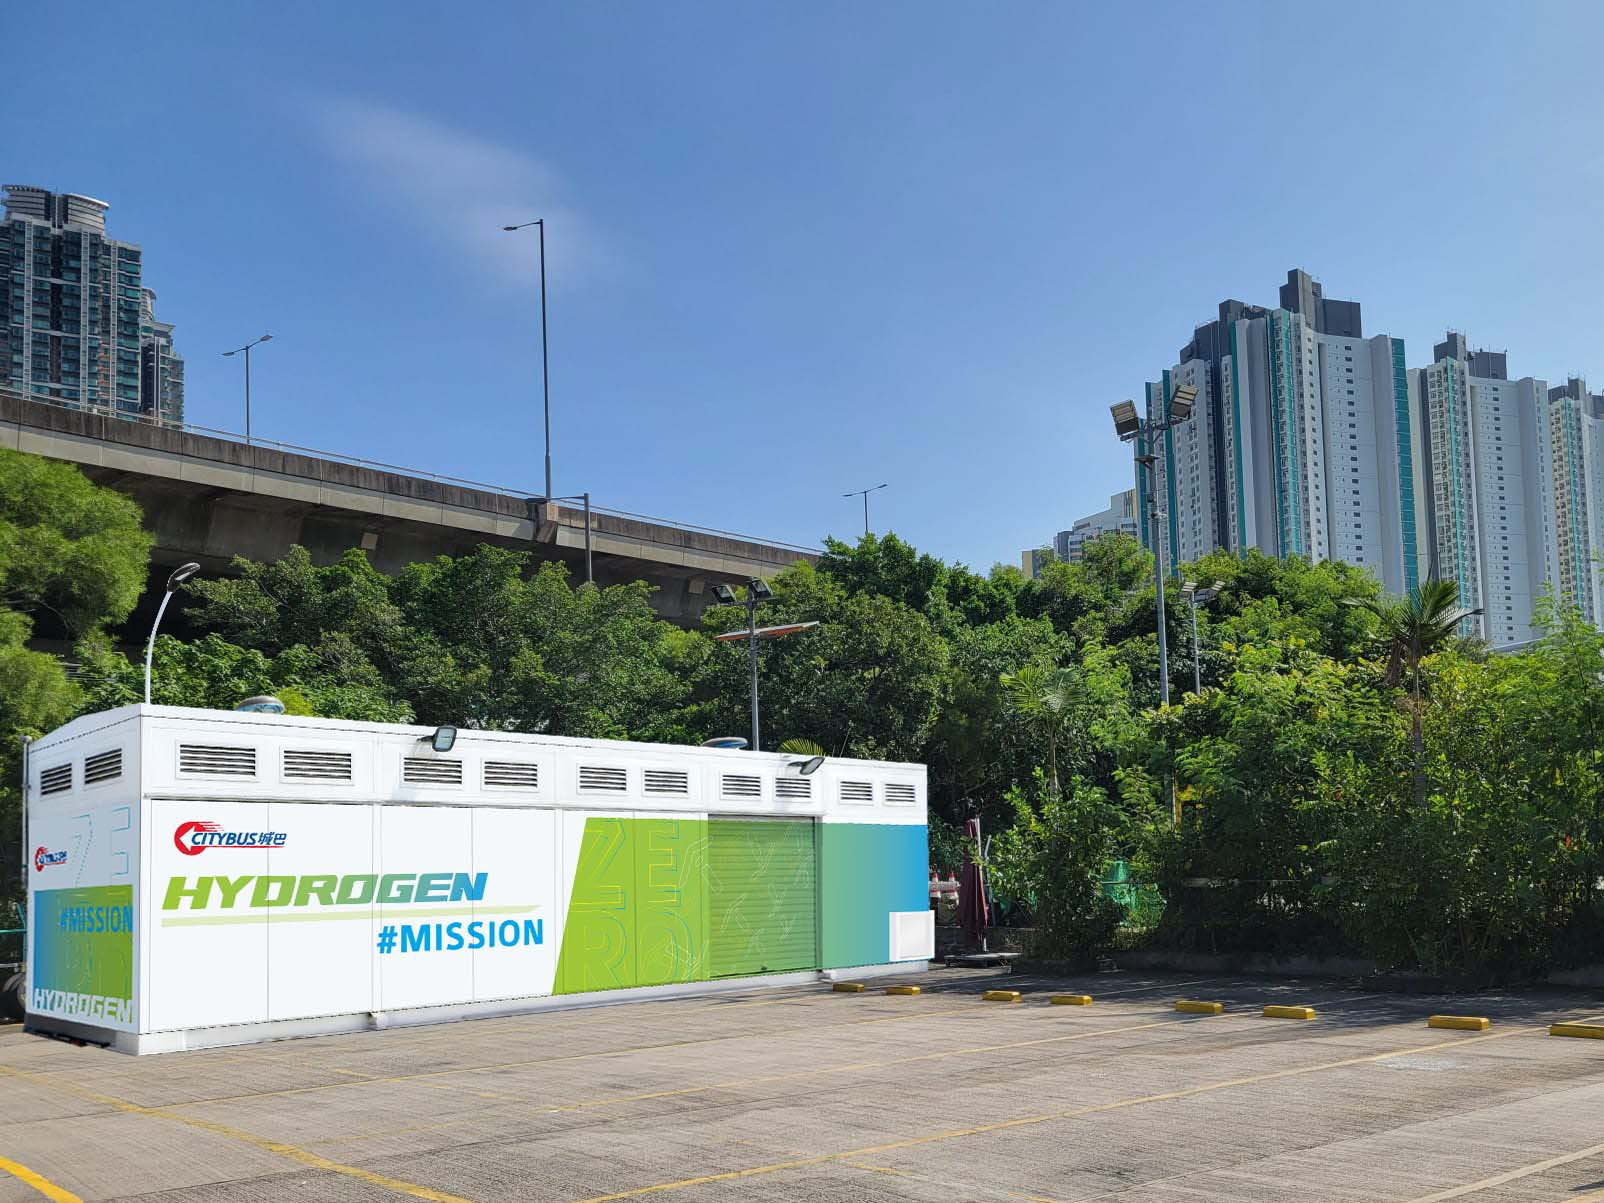 CIMC Enric won the bid for the first hydrogen refueling station project in Hong Kong